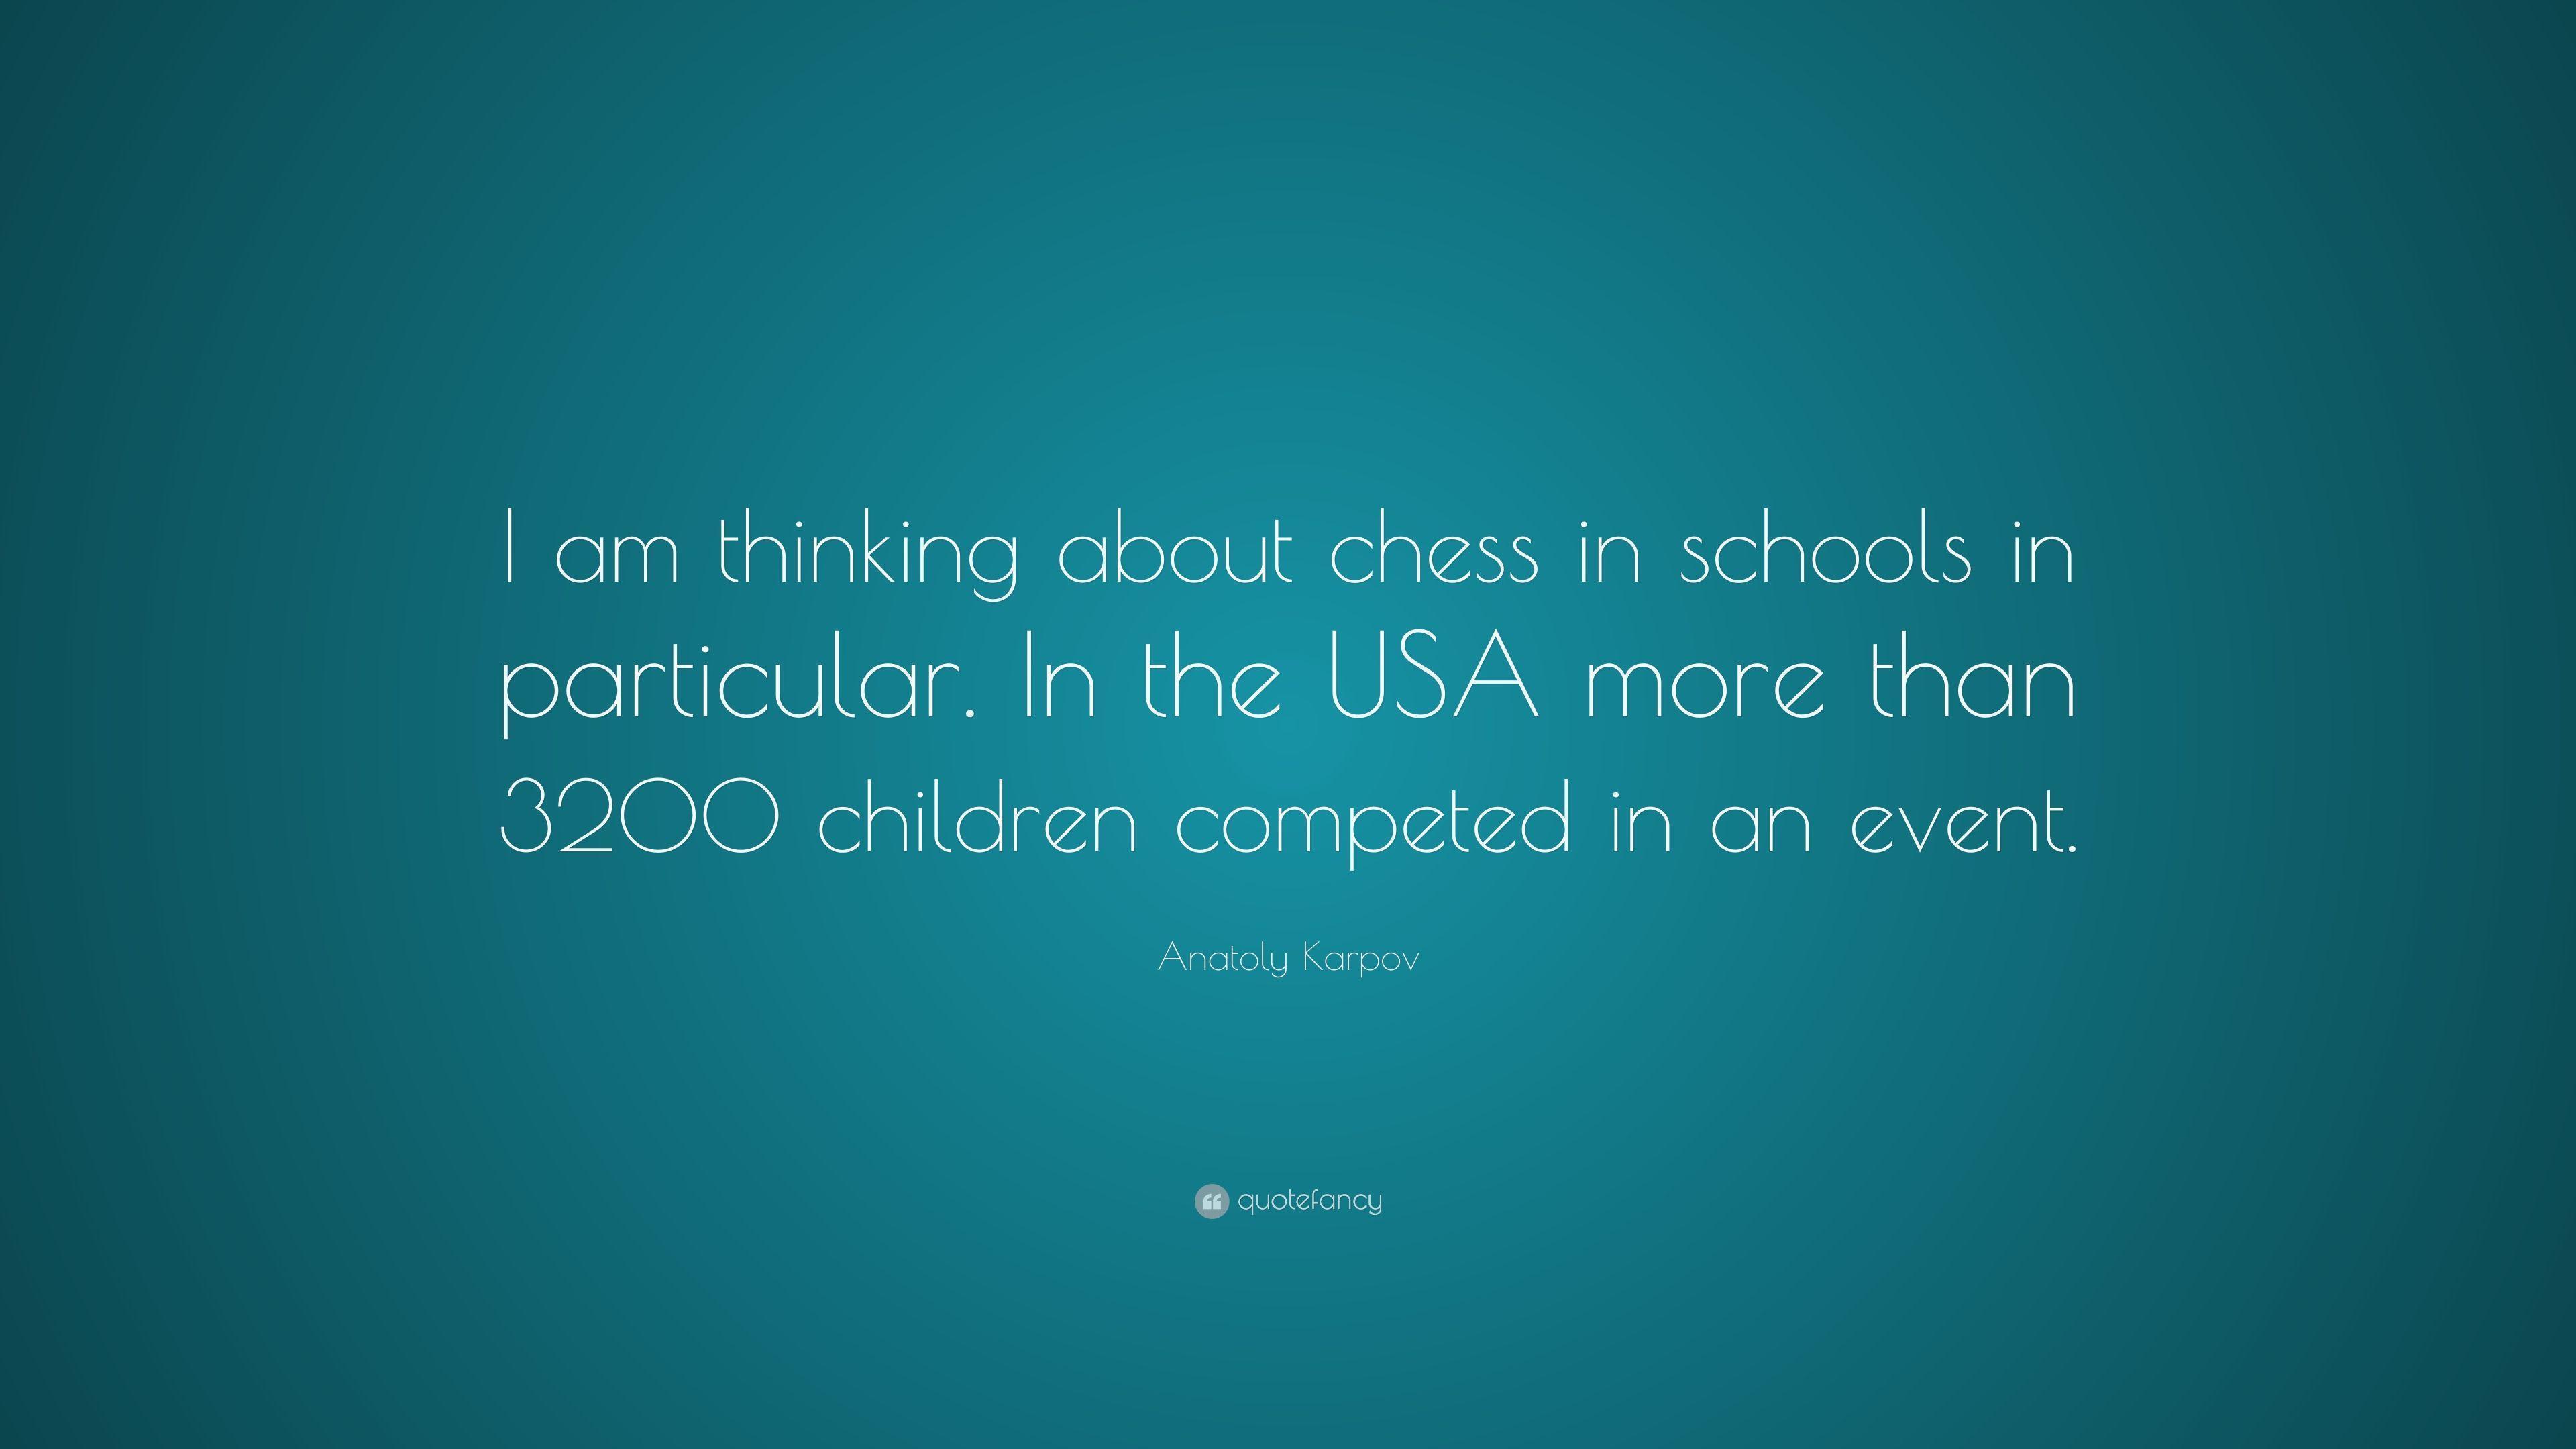 Anatoly Karpov Quote: “I am thinking about chess in schools